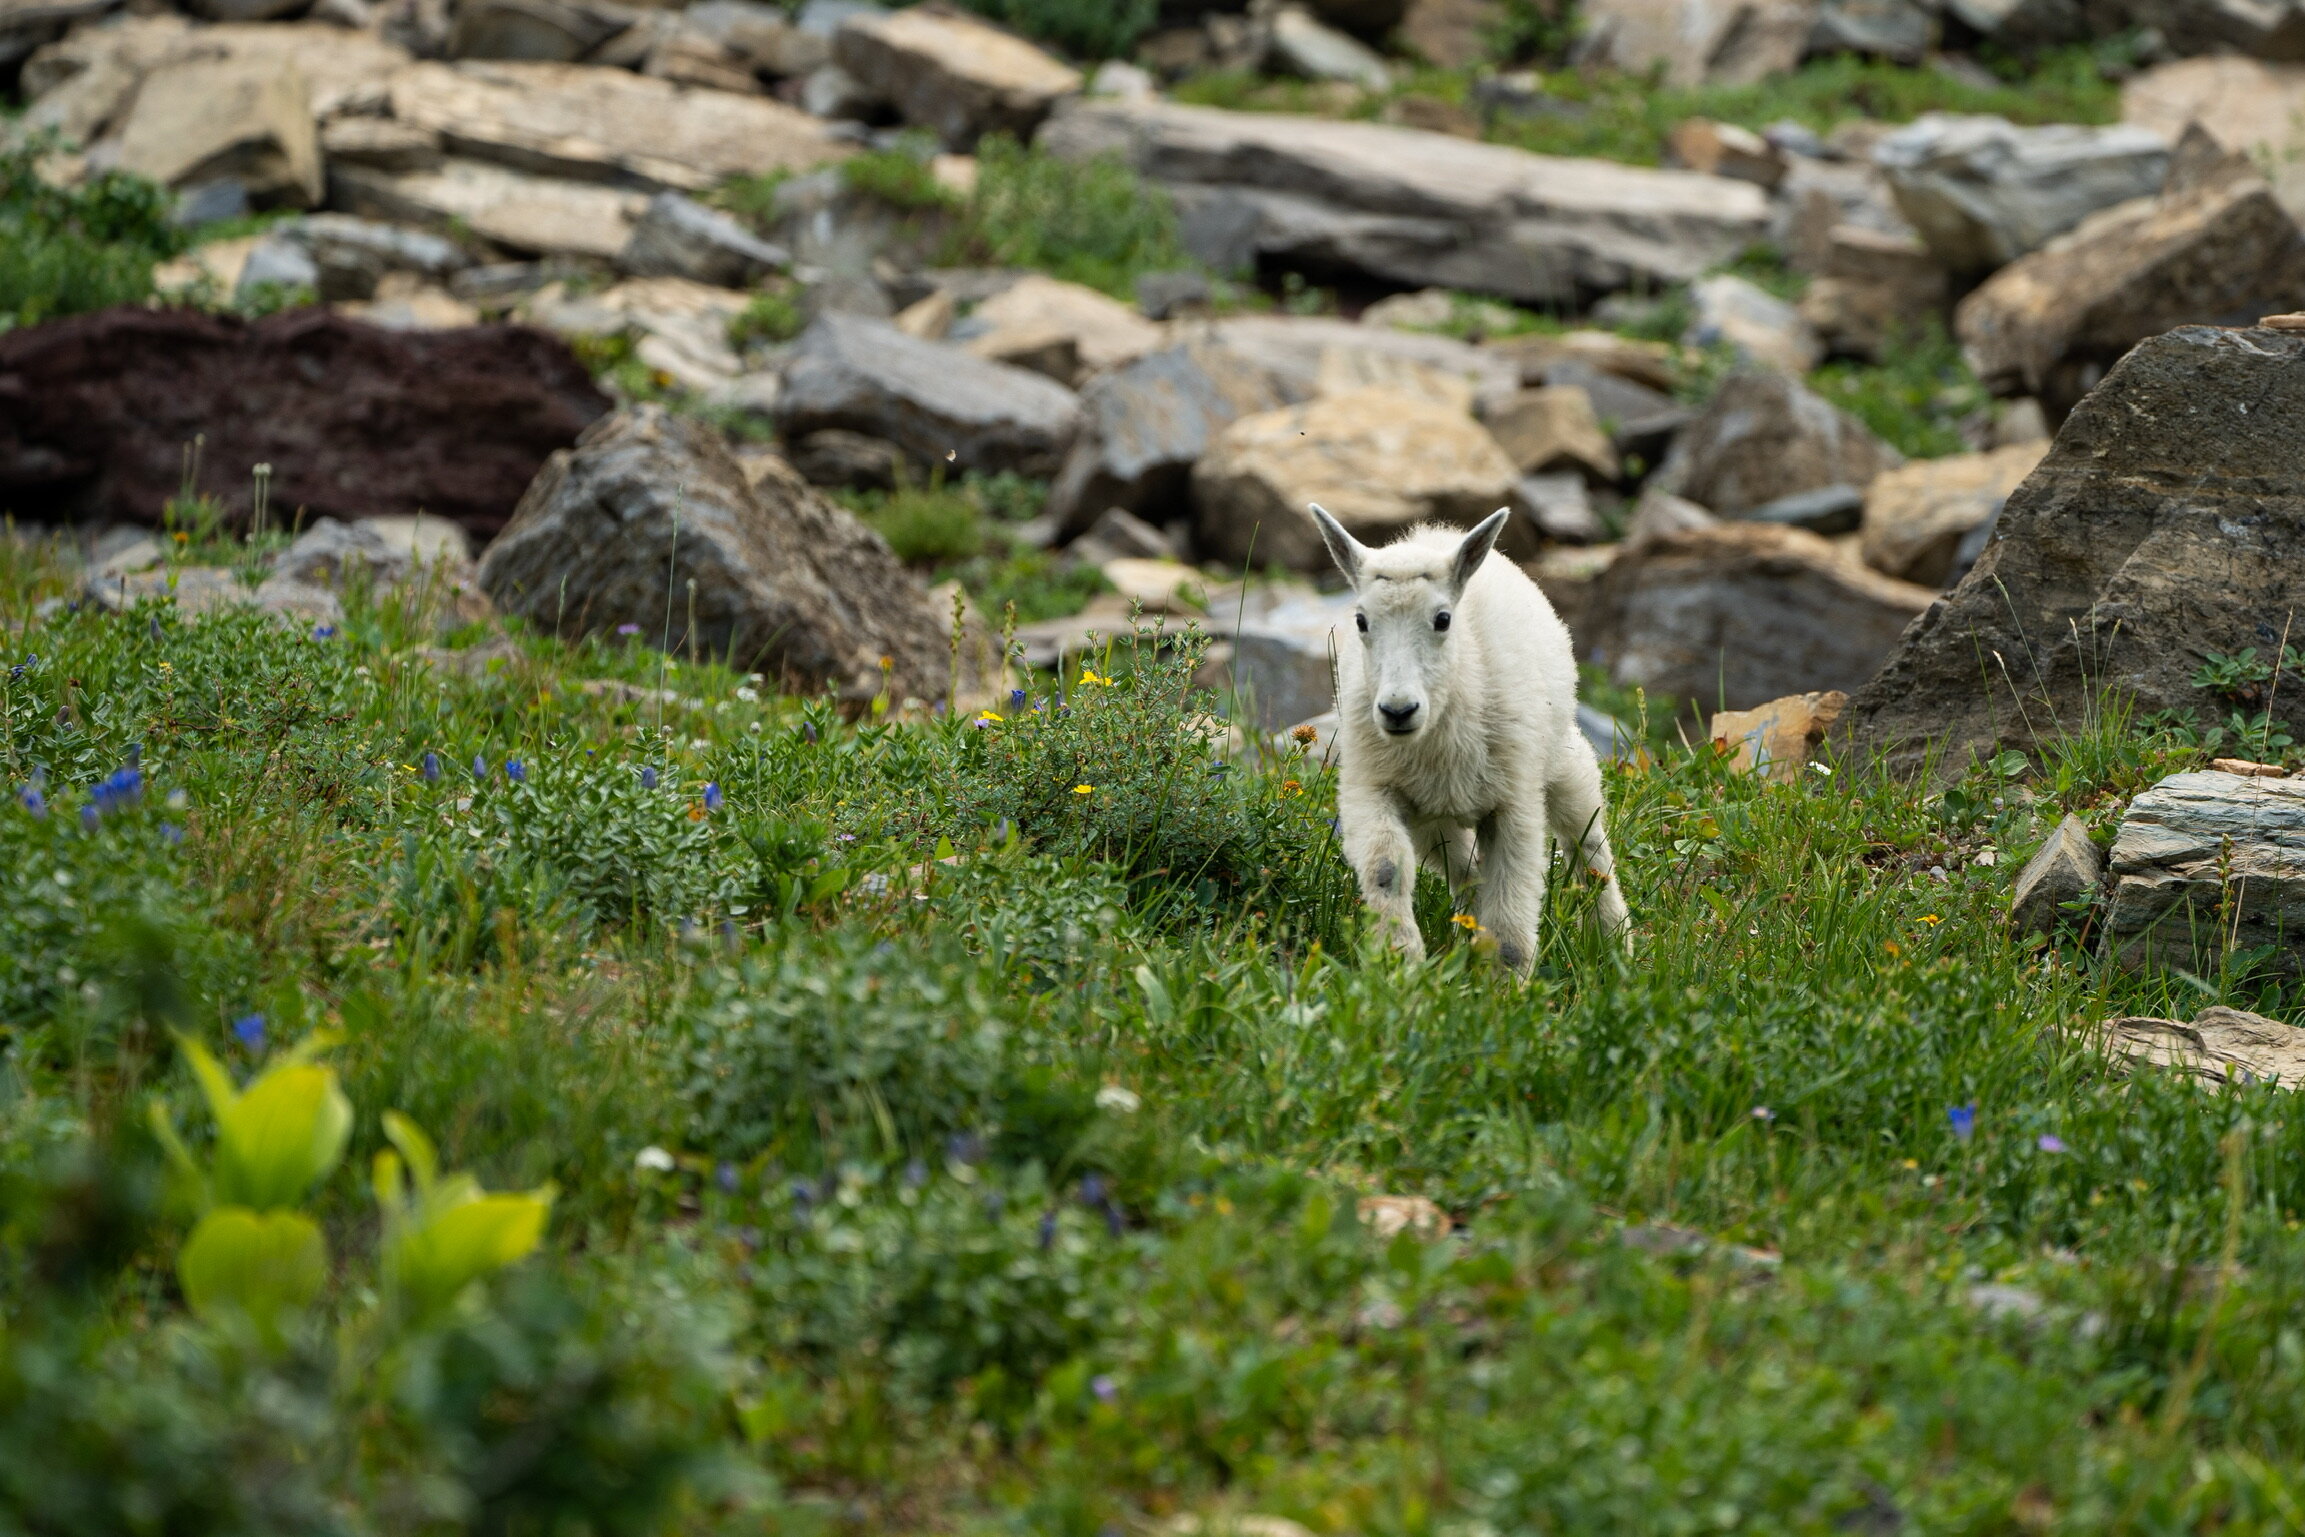  Also on the Highline Trail, was this sweet, baby mountain goat!    